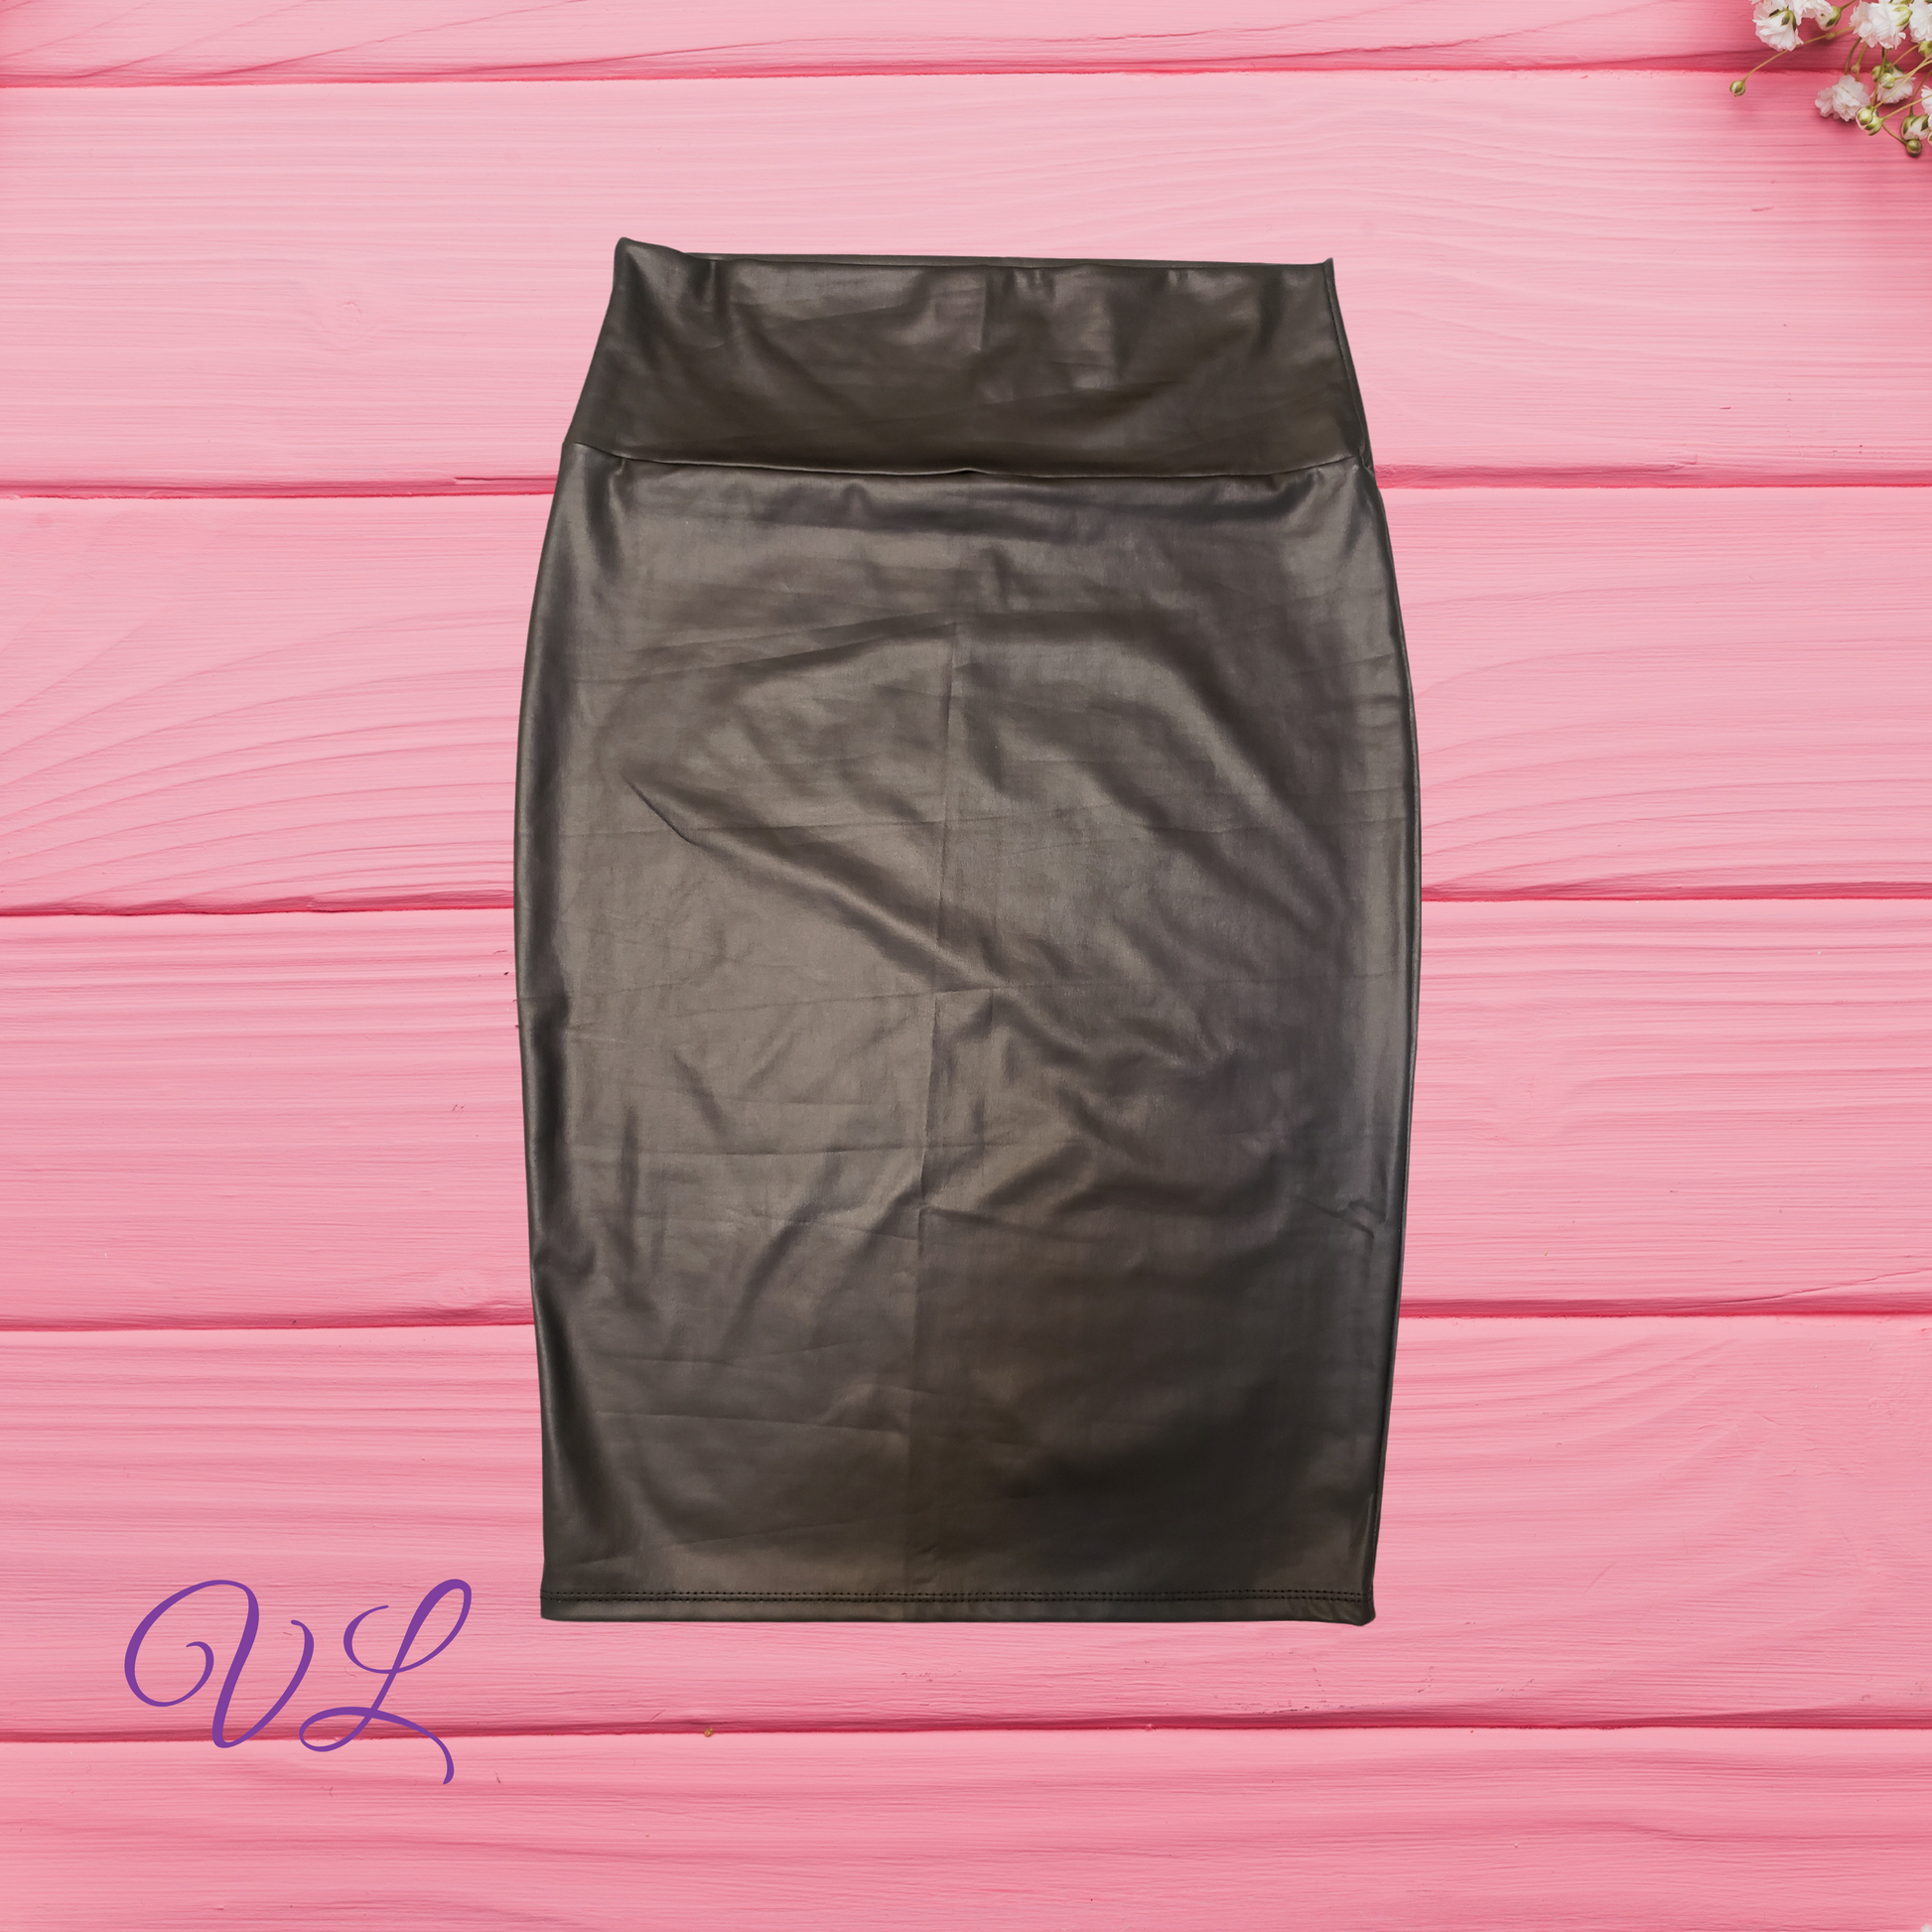 The Angel skirt is a black faux leather high waisted pencil skirt that gives just enough jazz to any outfit.  Made with materials in the U.S.A. This skirt comes down just below the knees and has plenty of stretch to hug over all your curves perfectly.   The skirt runs true to size.  The Angel will look great on all body types.